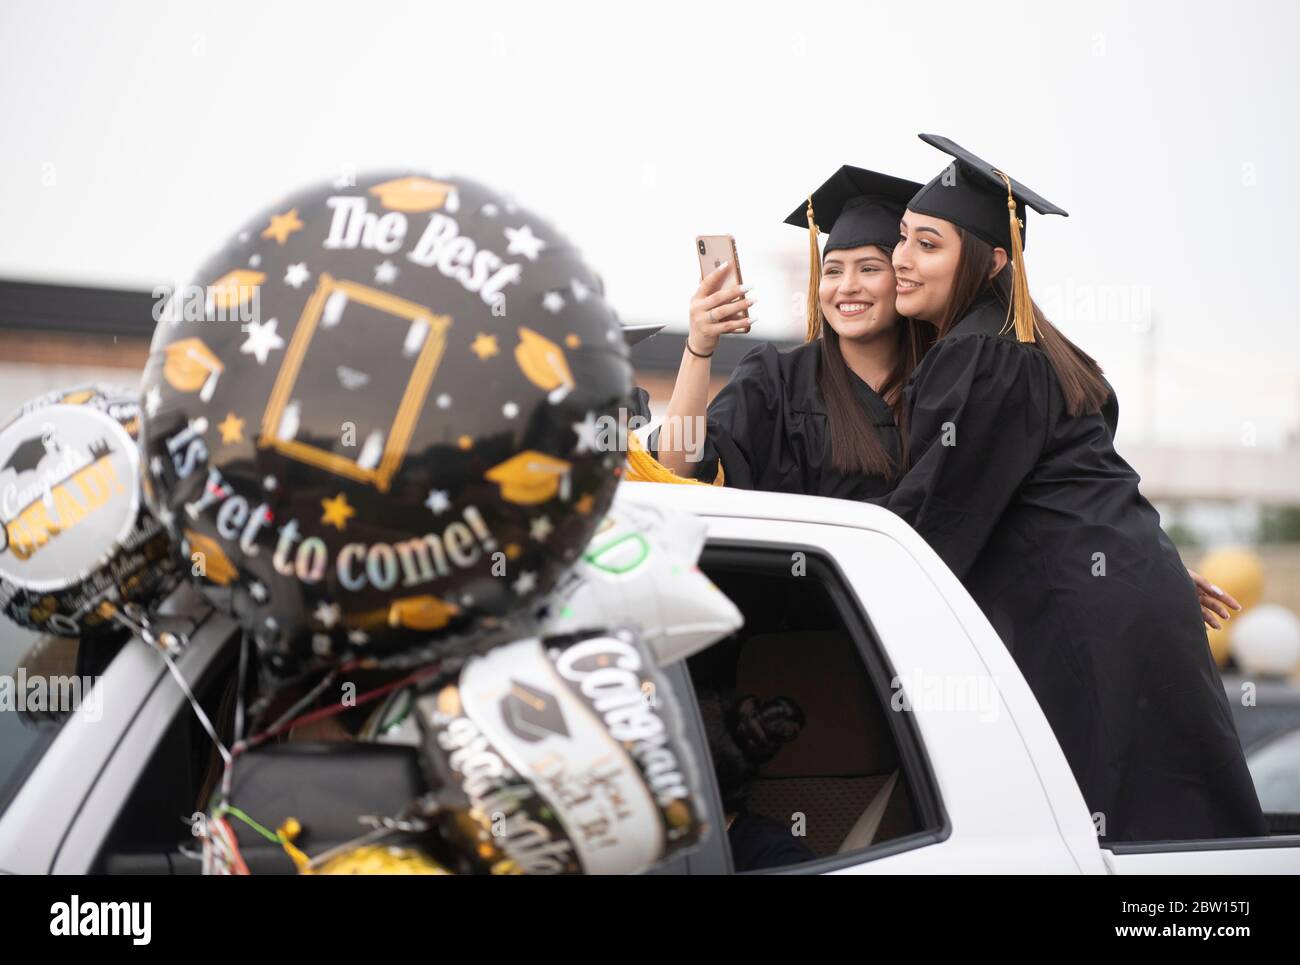 Graduates of Navarro Early College High School, including Esmerelda Alvarez (l) and Alma Pina, parade through their north Austin neighborhood on May 28, 2020 as they celebrate an academic finale shortened by the coronavirus pandemic. About 200 graduates piled into cars, waving at family and friends in the two-mile parade. Credit: Bob Daemmrich/Alamy Live News Stock Photo